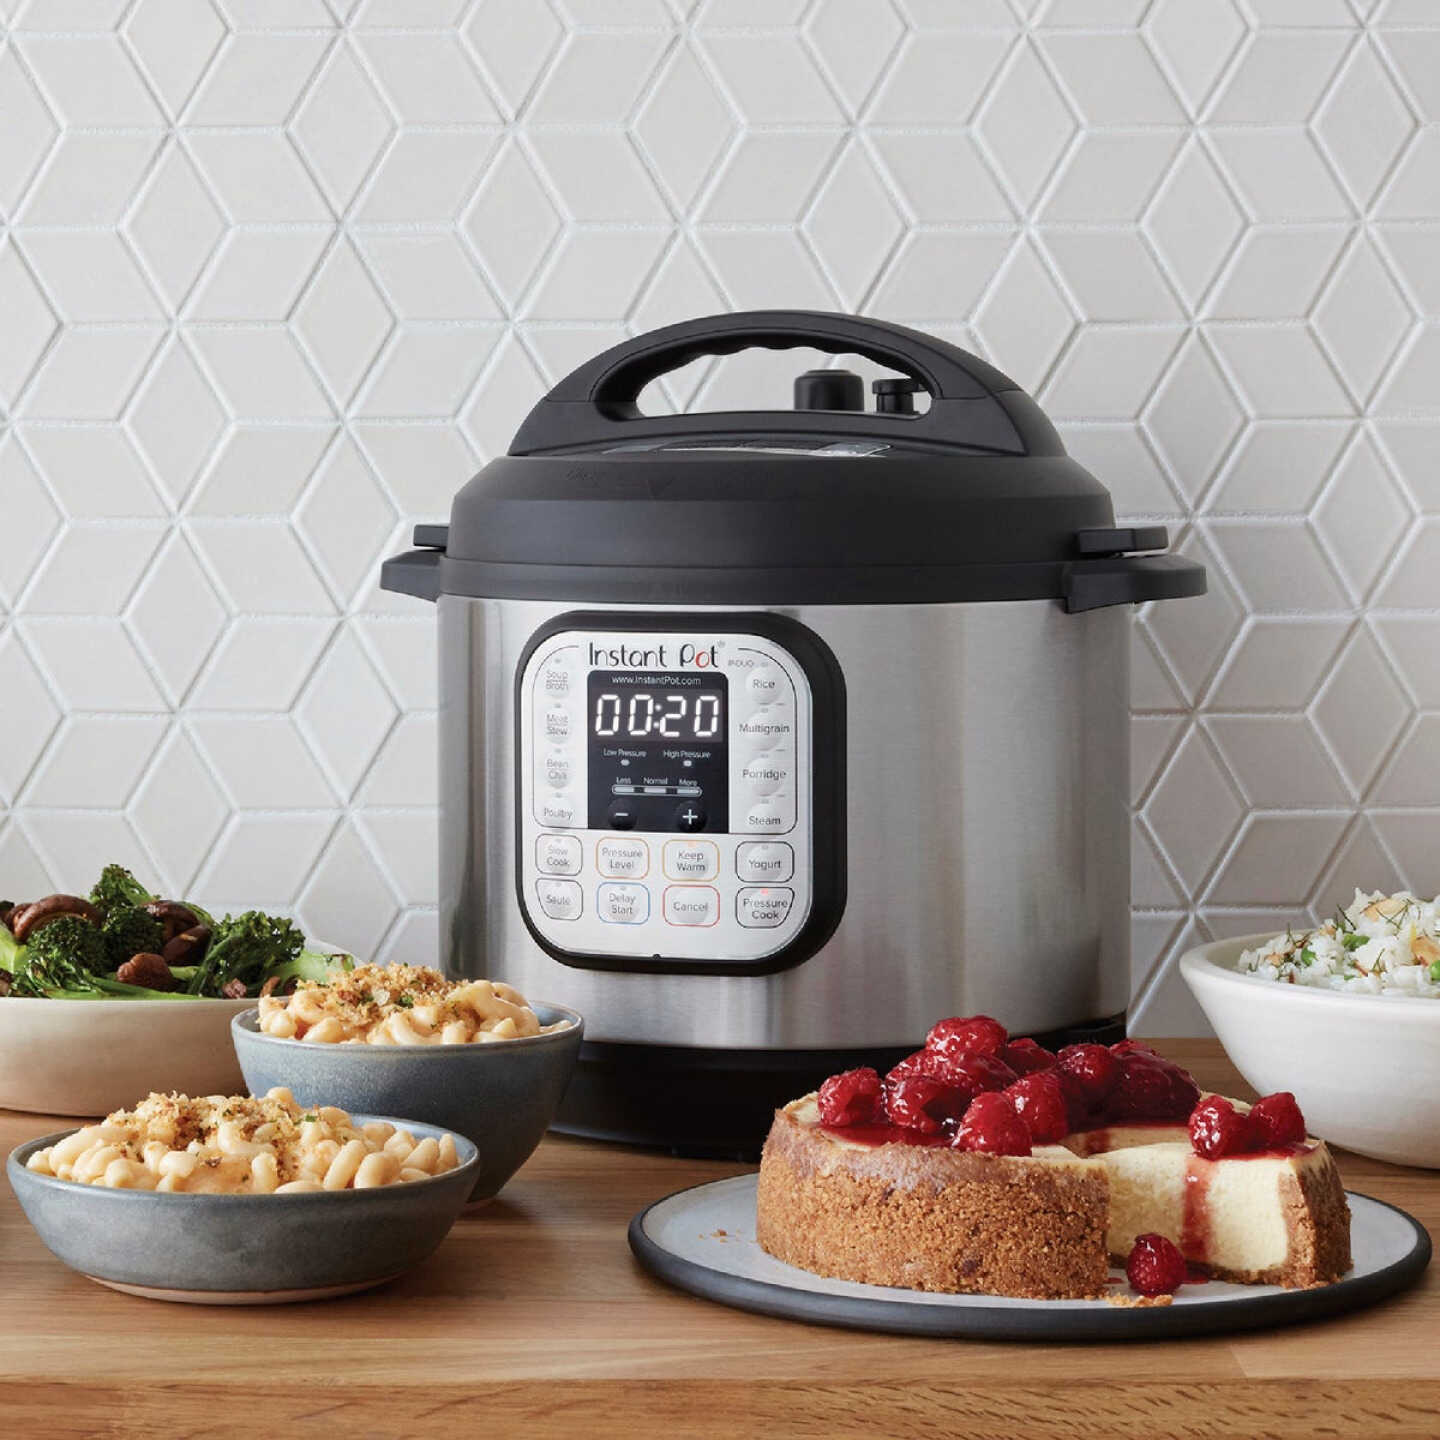 Instant Pot Duo 8 Qt. 7-in-1 Multi-Use Cooker Image 2